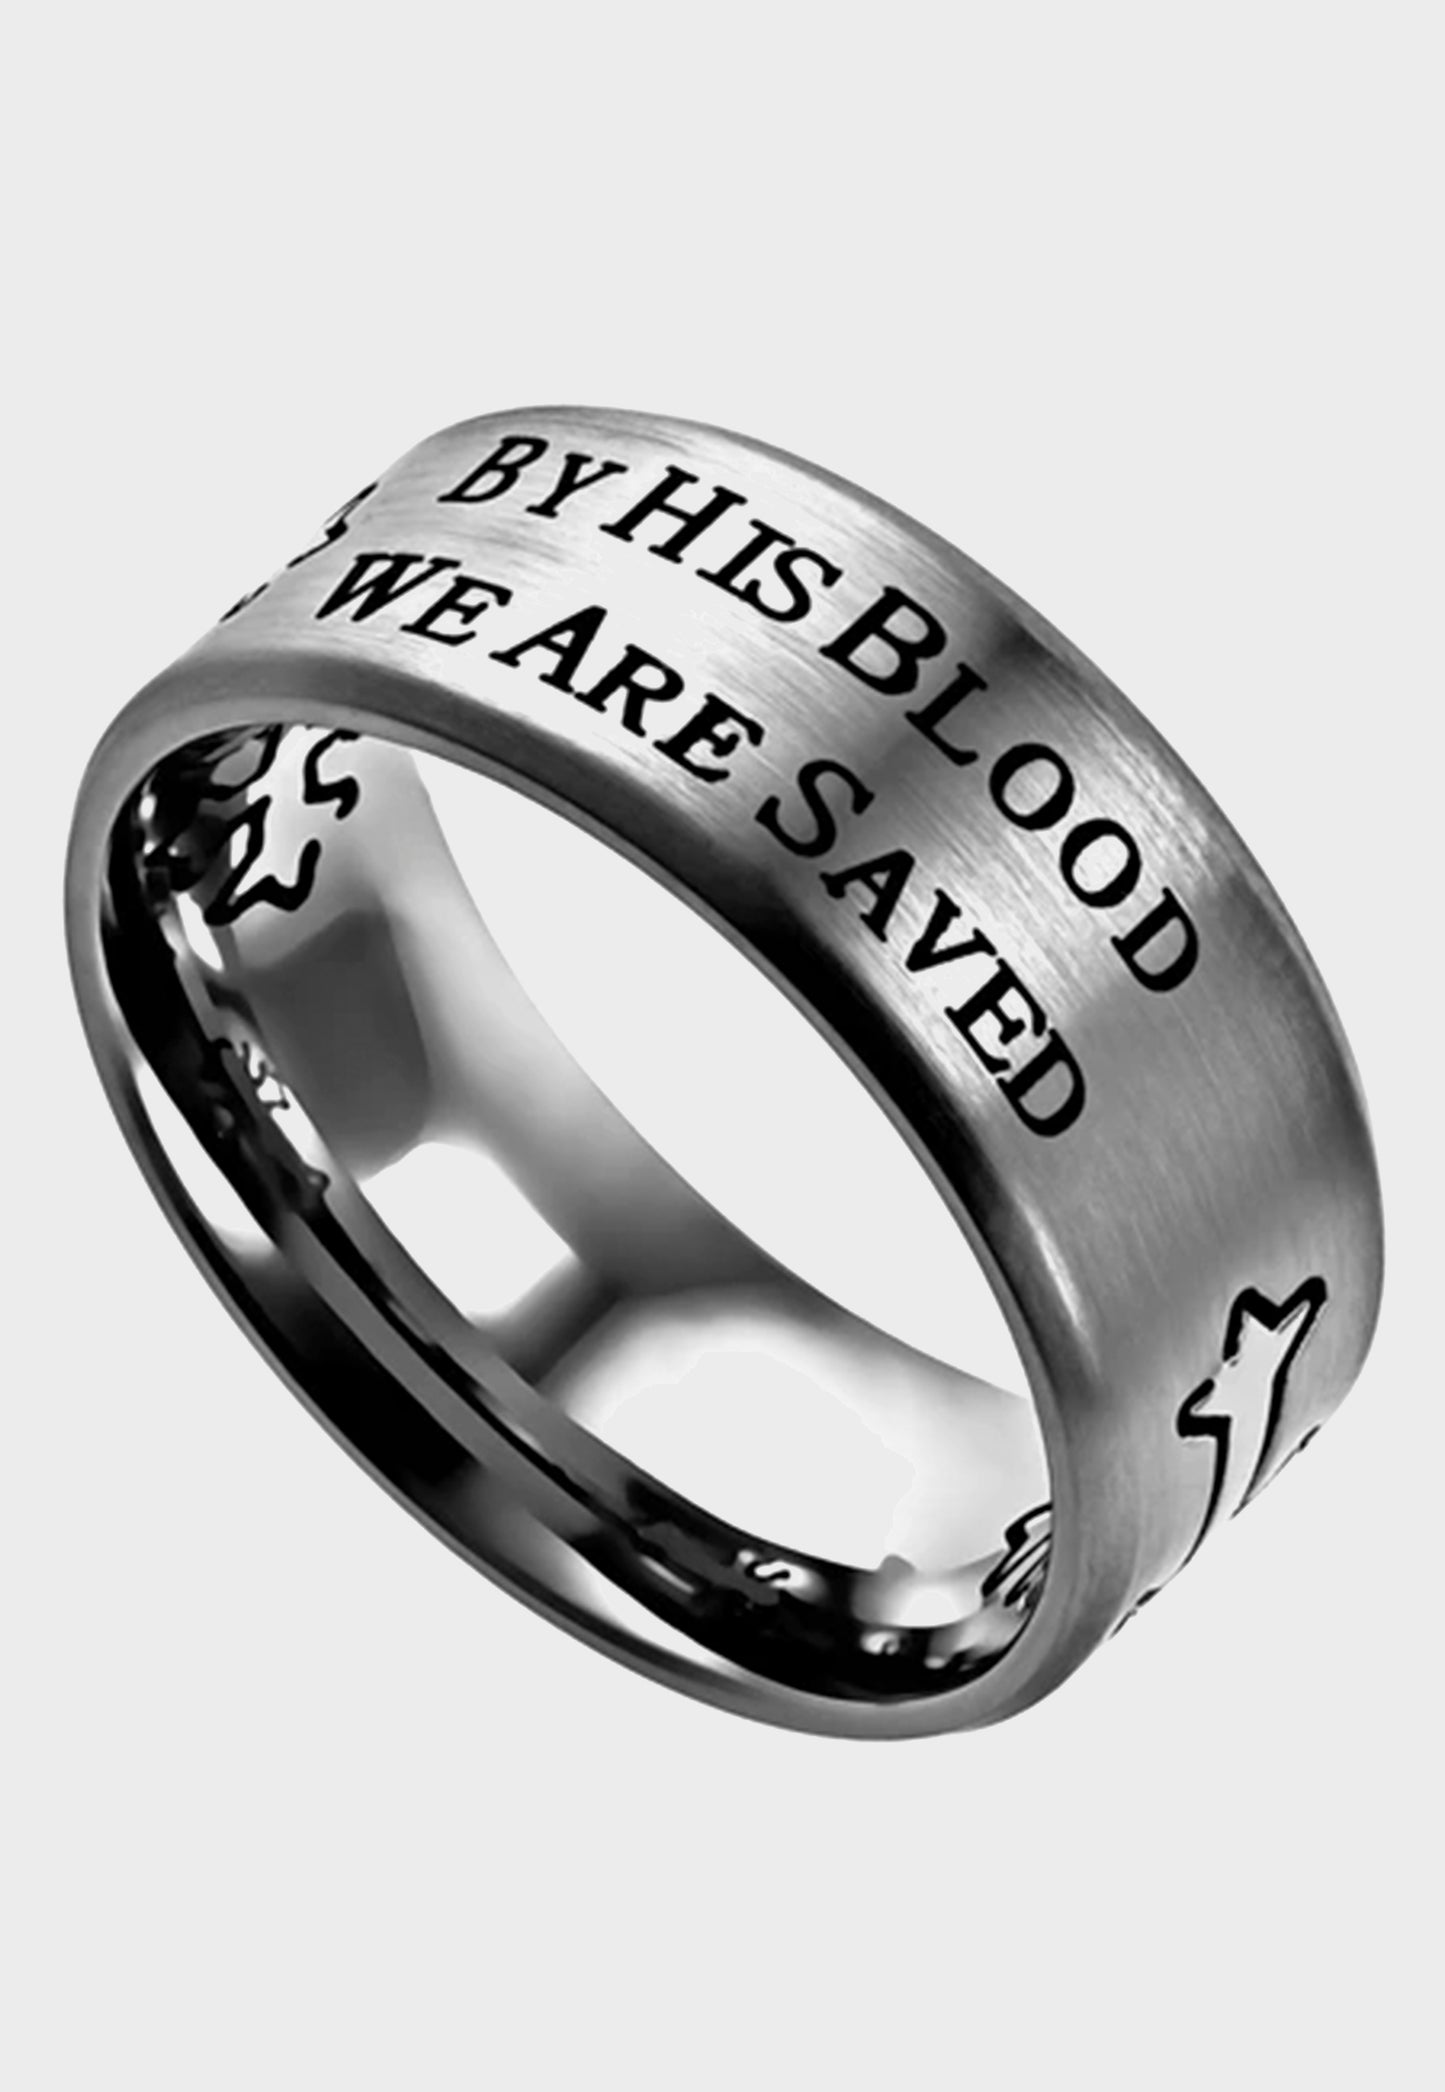 By His Blood We Are Saved men's ring